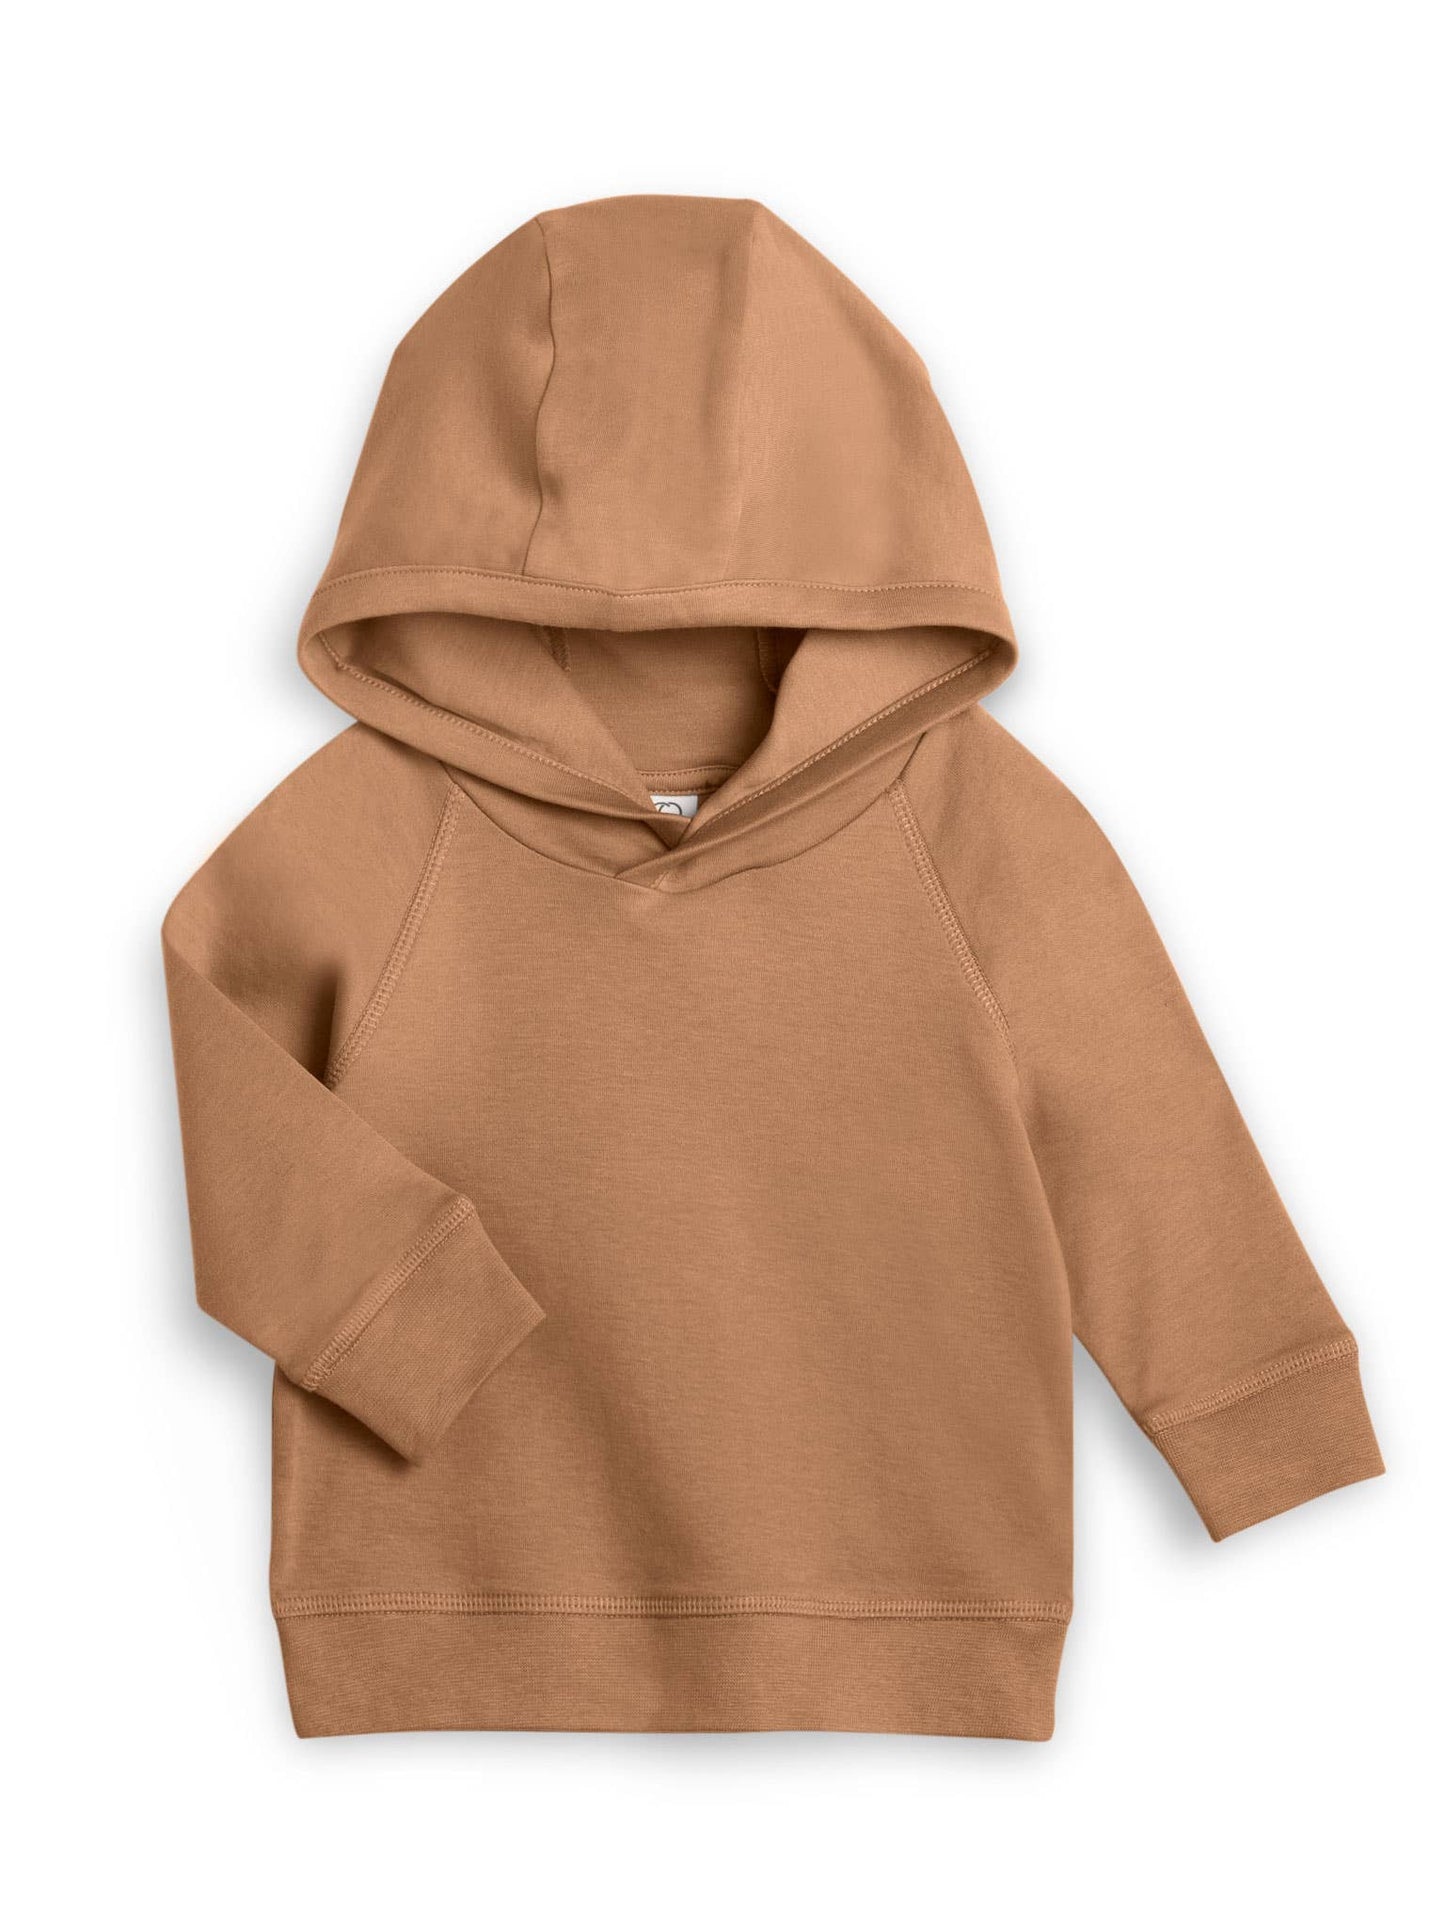 Colored Organics - Organic Baby and Kids Madison Hooded Pullover - Ginger